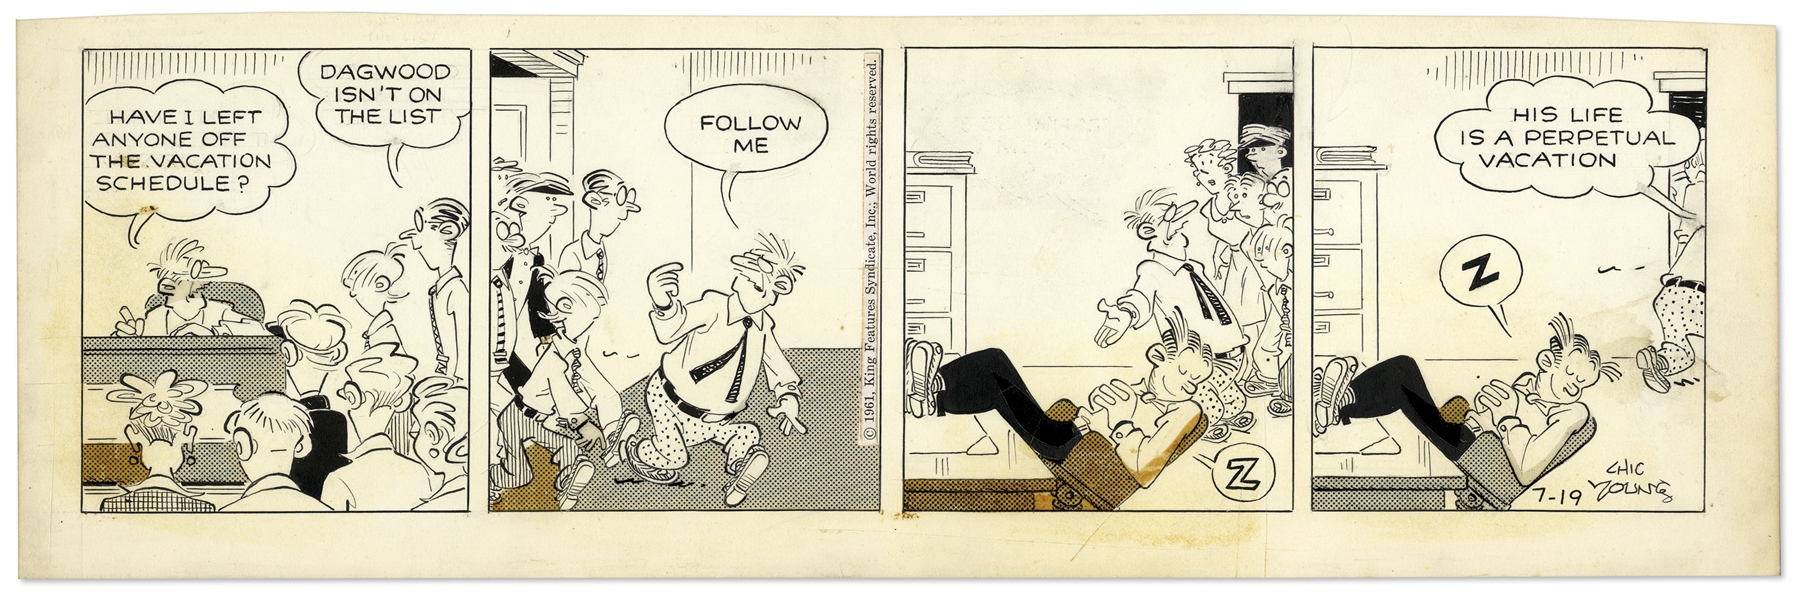 2 Chic Young Hand-Drawn ''Blondie'' Comic Strips From 1961 -- With Chic Young's Original Artwork for One